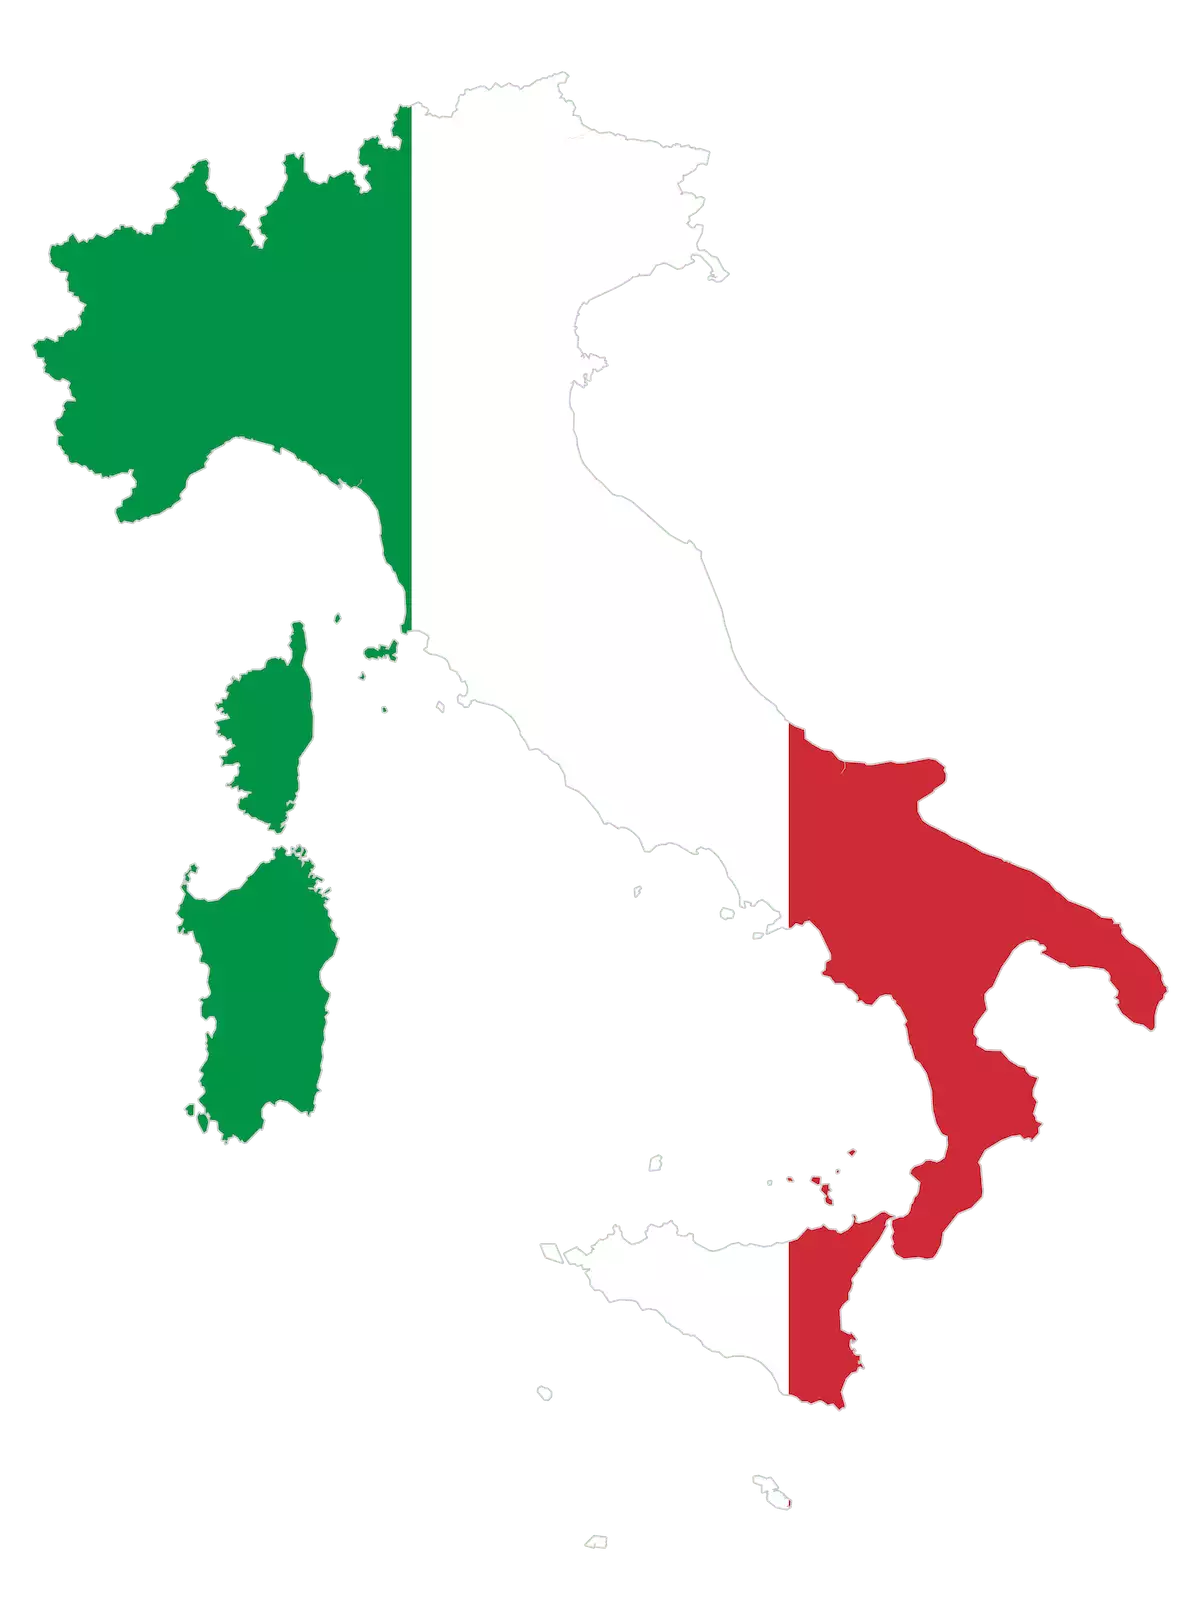 Map of Italy with flag colors